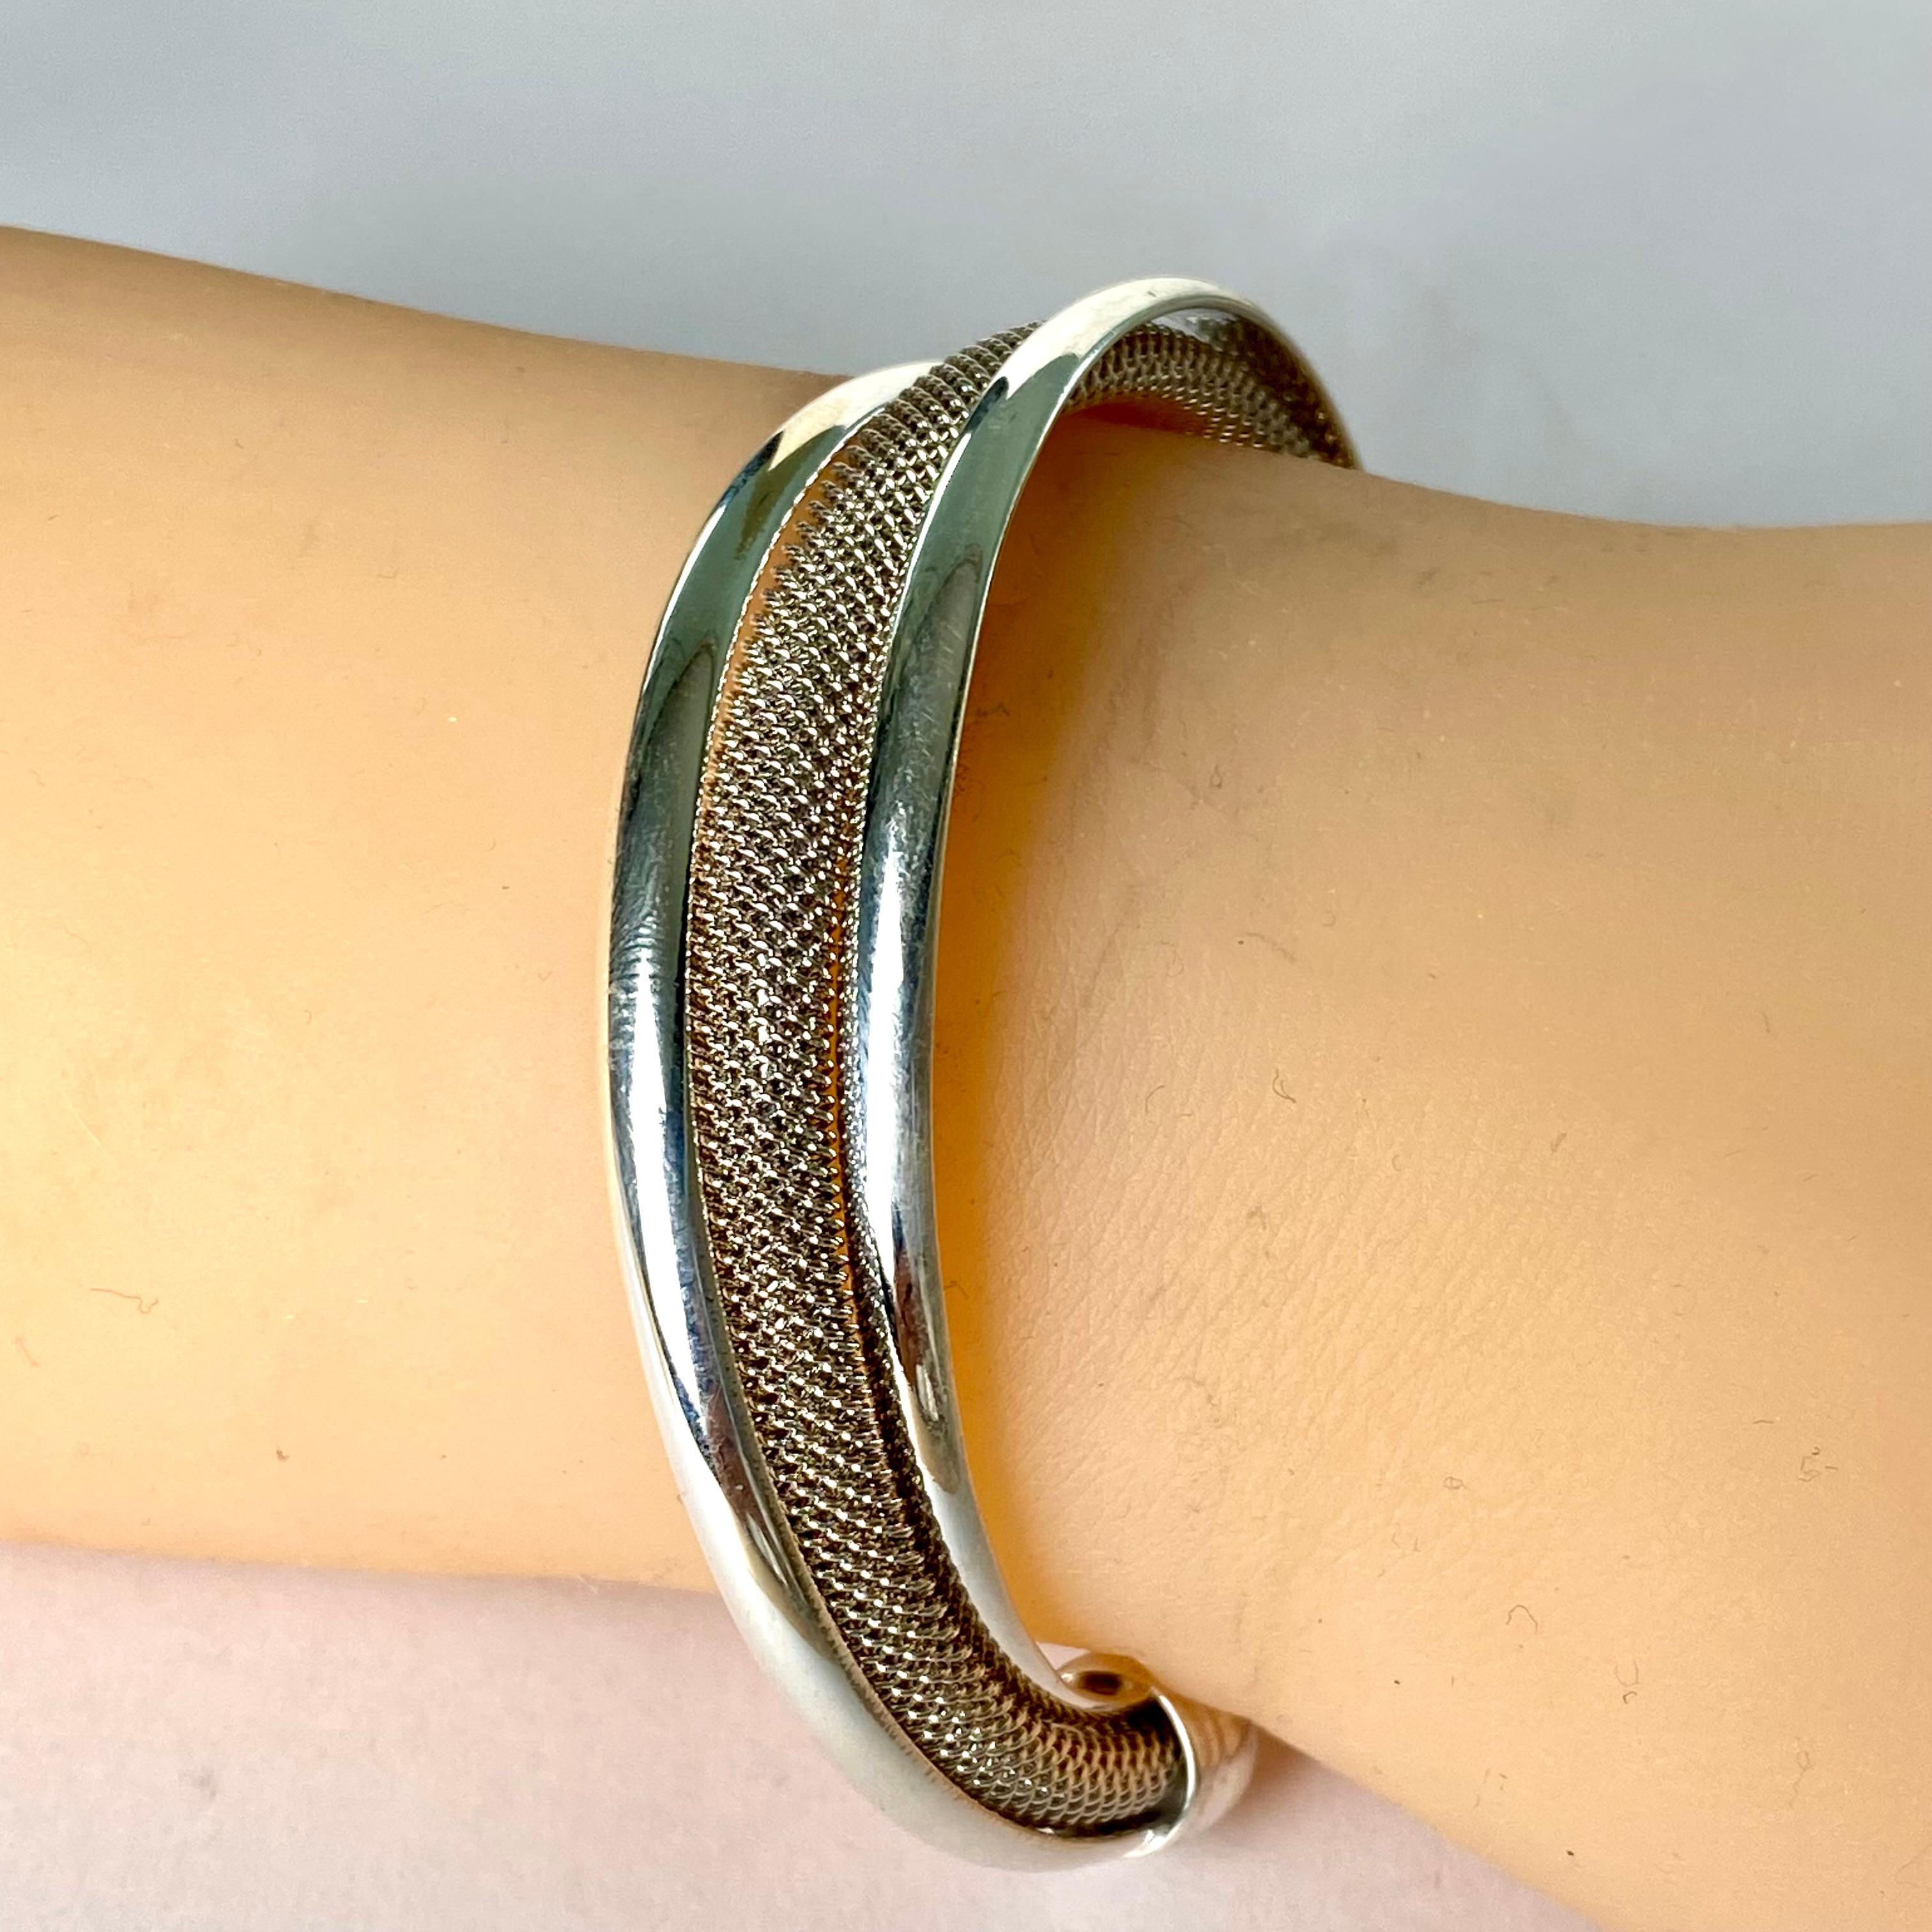 Introducing an exquisite piece of jewelry for discerning collectors and aficionados of timeless elegance – the Vintage Tiffany & Co Sterling Silver Cuff Bracelet. Crafted with precision and artistry by the renowned Tiffany & Co, this cuff bracelet